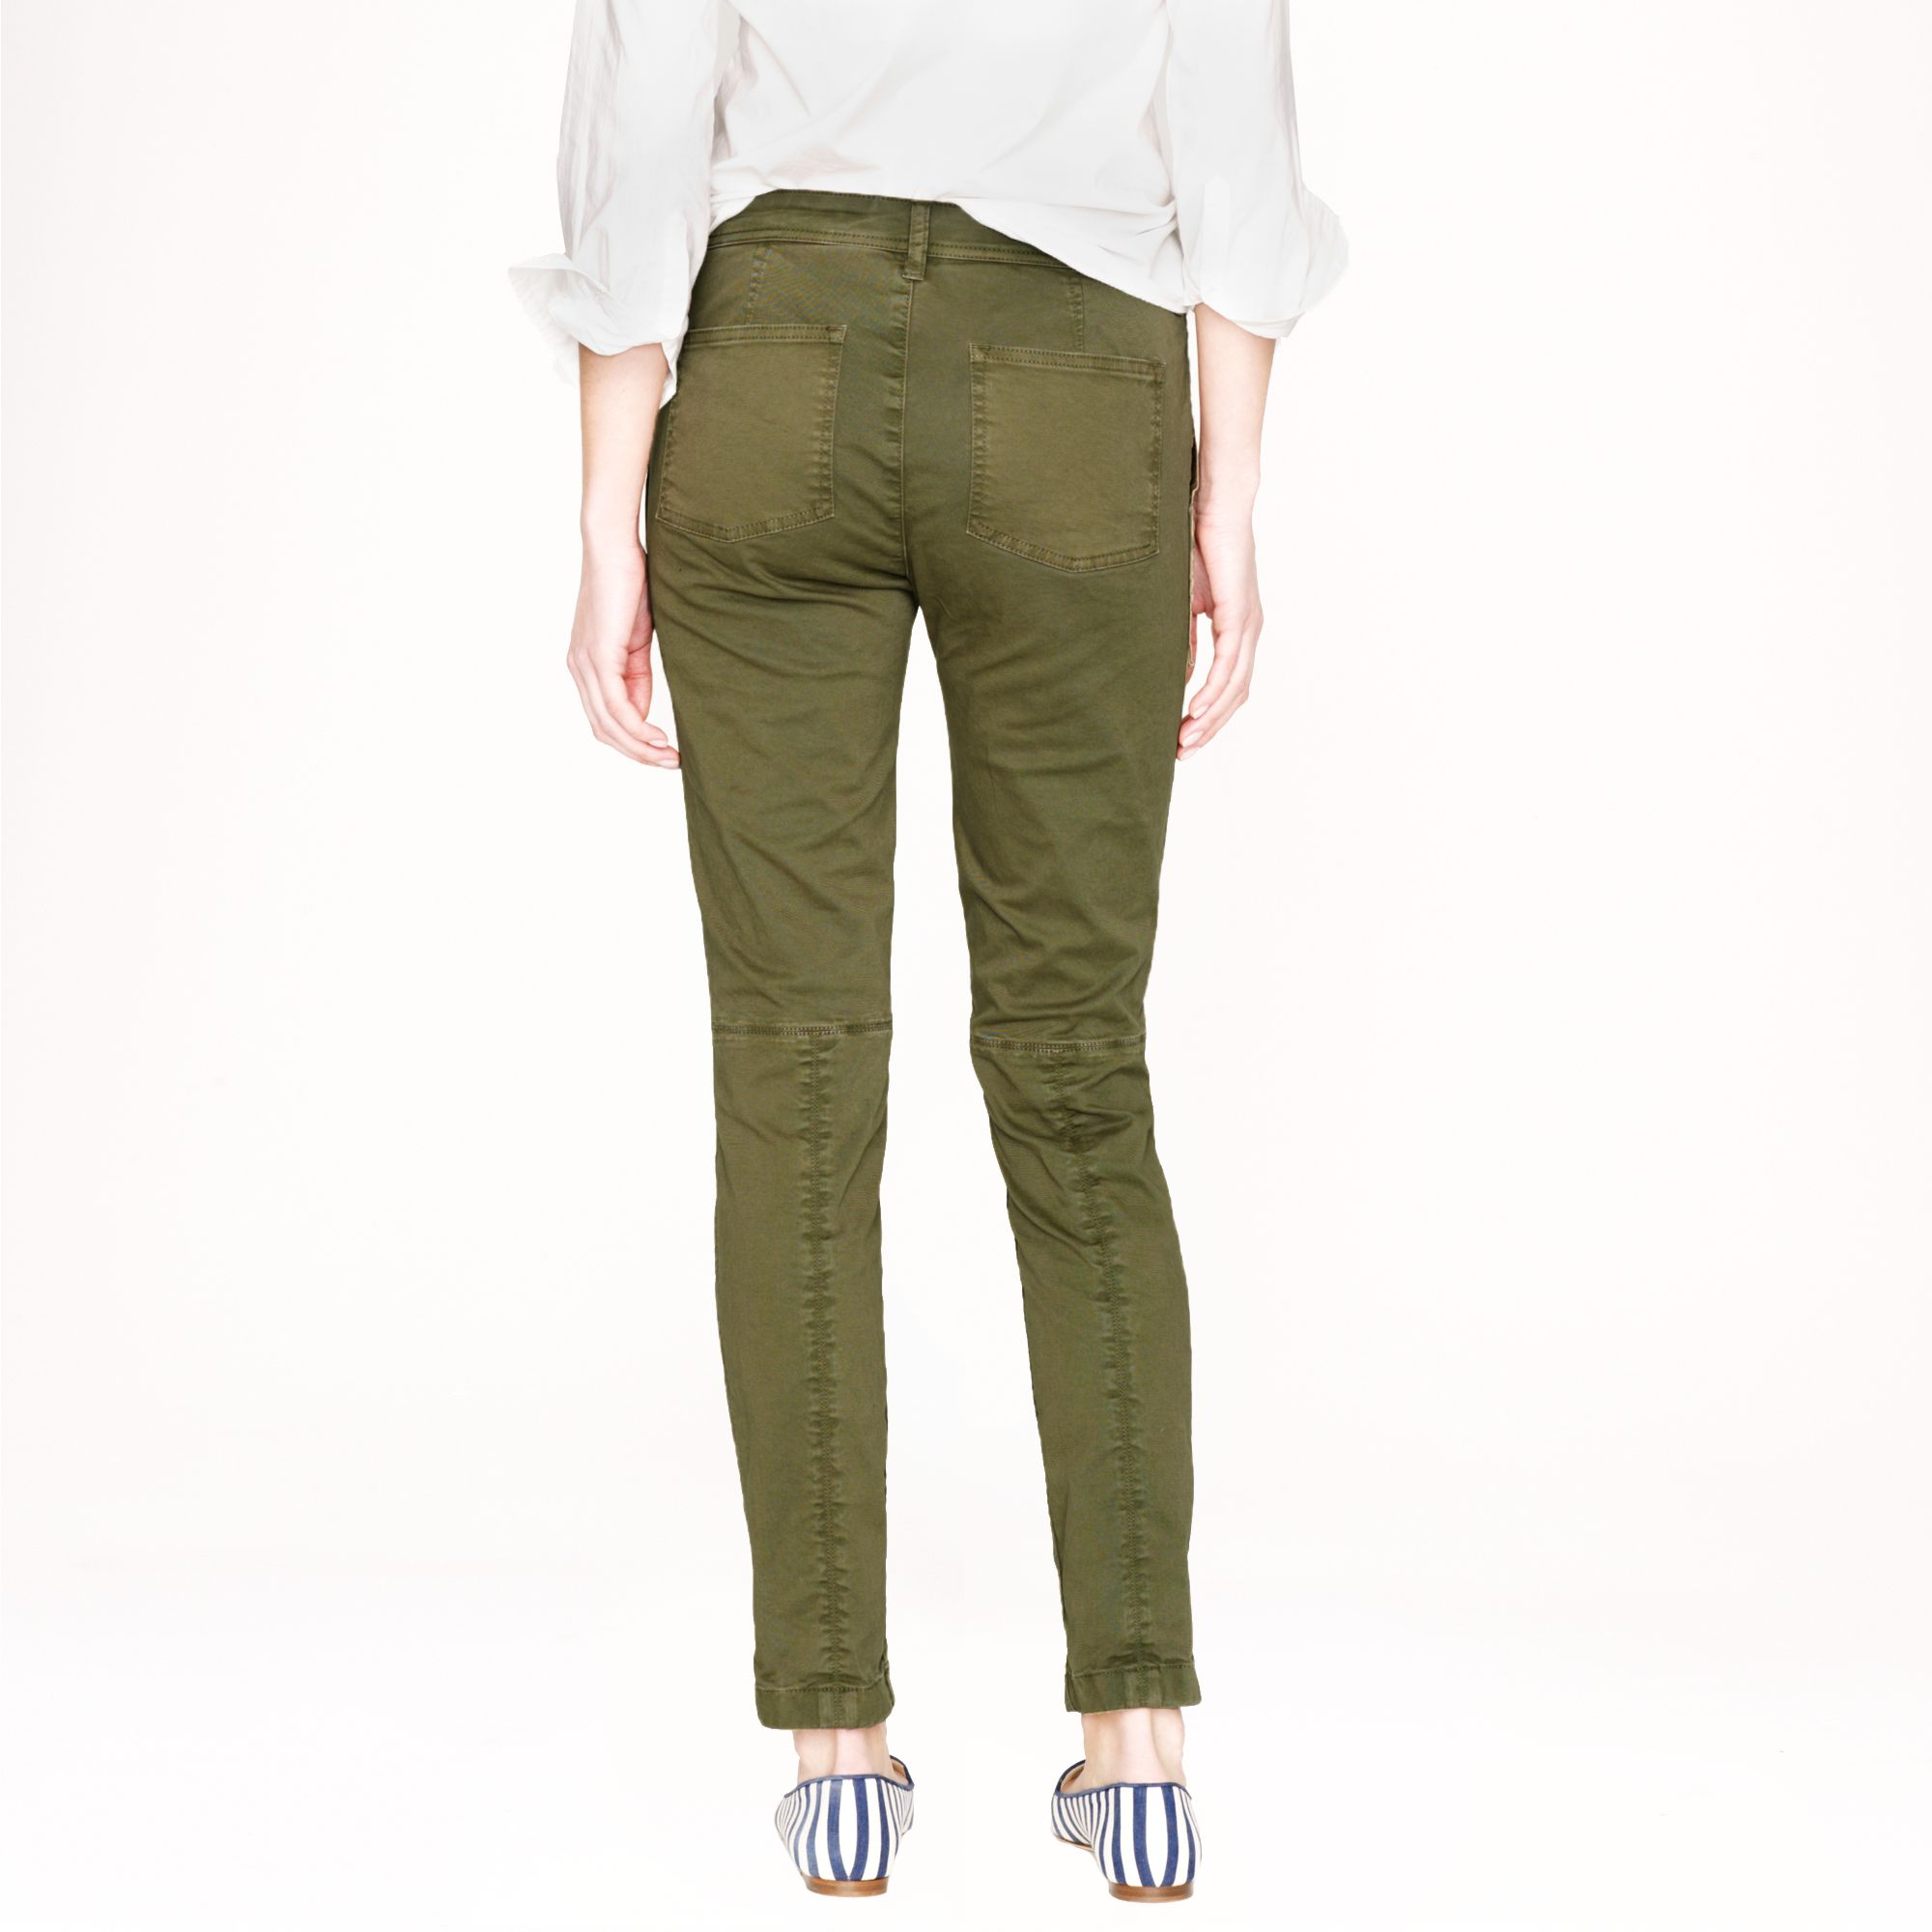 Lyst - J.Crew Skinny Washed Twill Utility Pant in Green